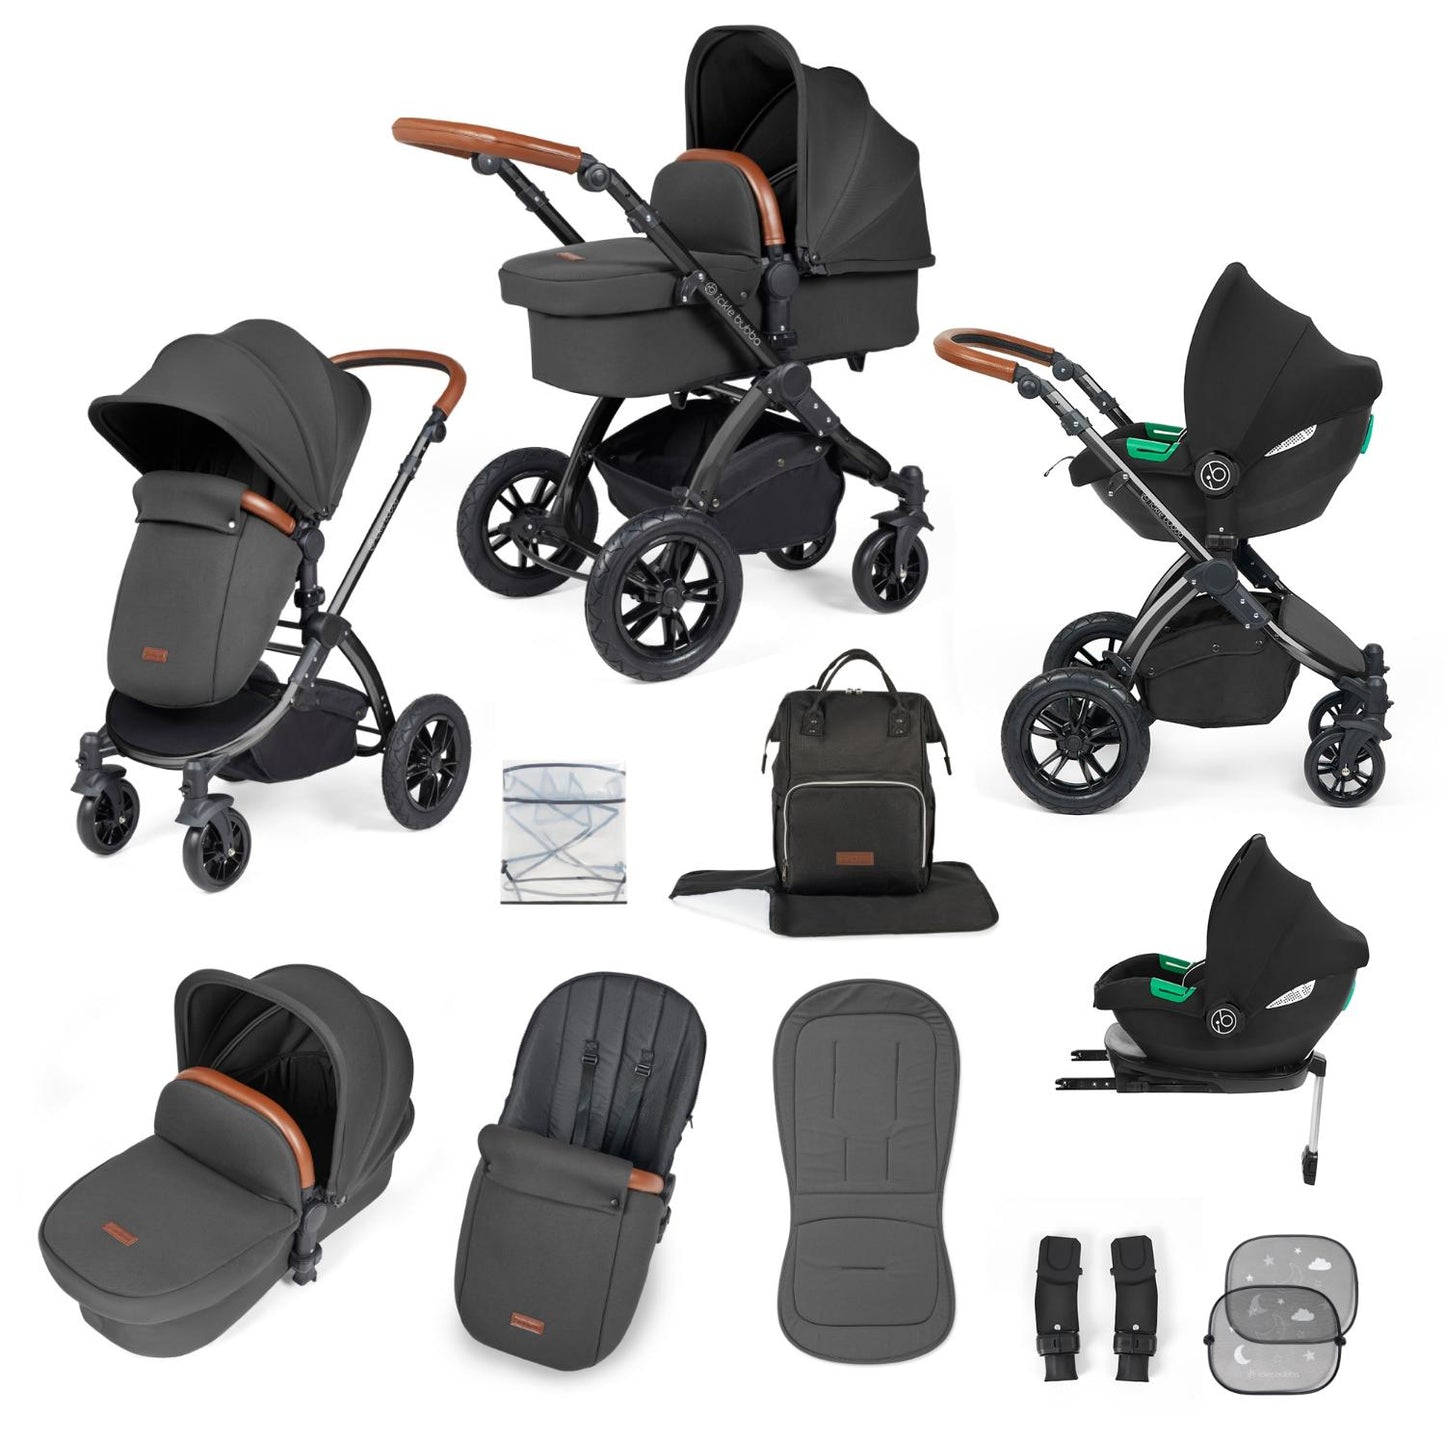 Ickle Bubba Stomp Luxe All-in-One Travel System with Cirrus i-Size Car Seat and ISOFIX Base and accessories in Charcoal Grey colour with tan handle